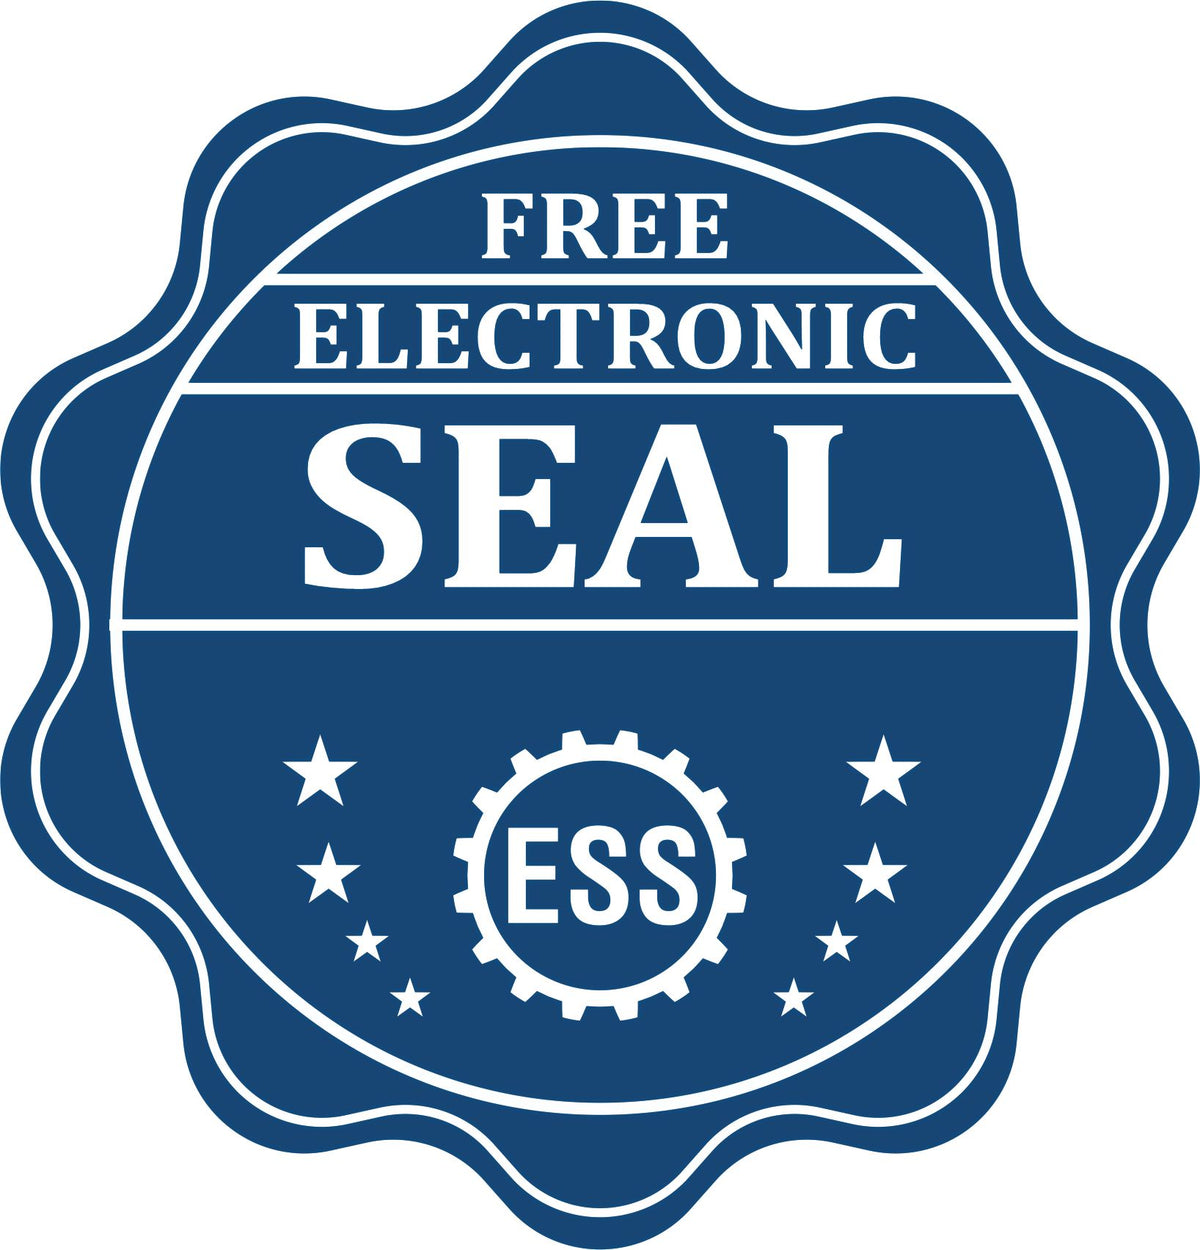 A badge showing a free electronic seal for the Ohio Engineer Desk Seal with stars and the ESS gear on the emblem.